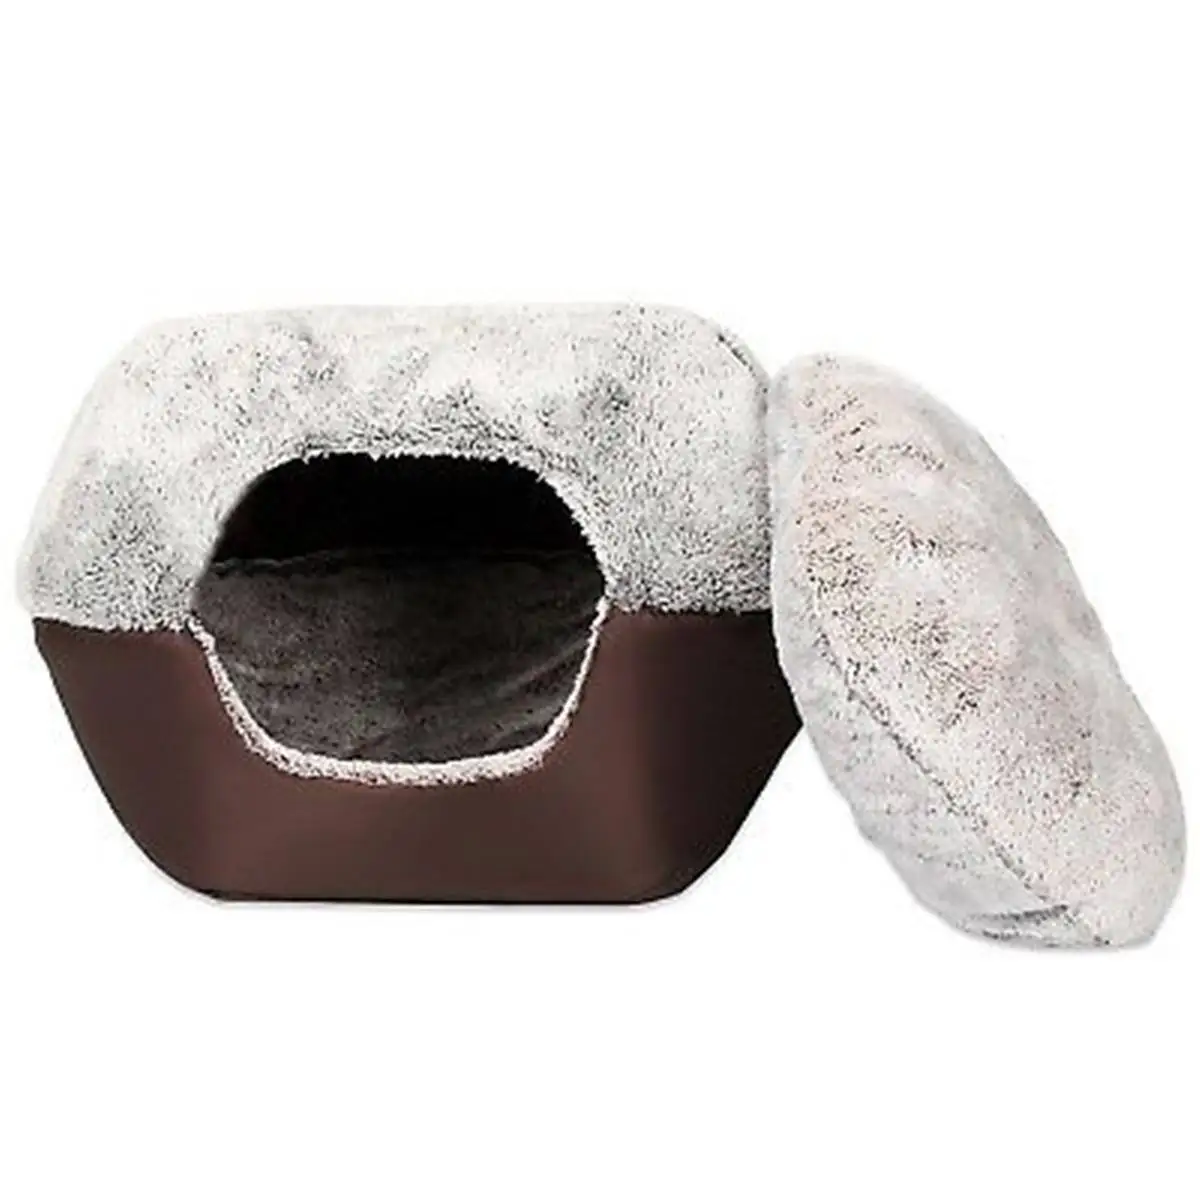 2 In 1 Warm Winter Cat Dog Bed M L Washable Soft Nest House Animal Puppy soft cat dog bed